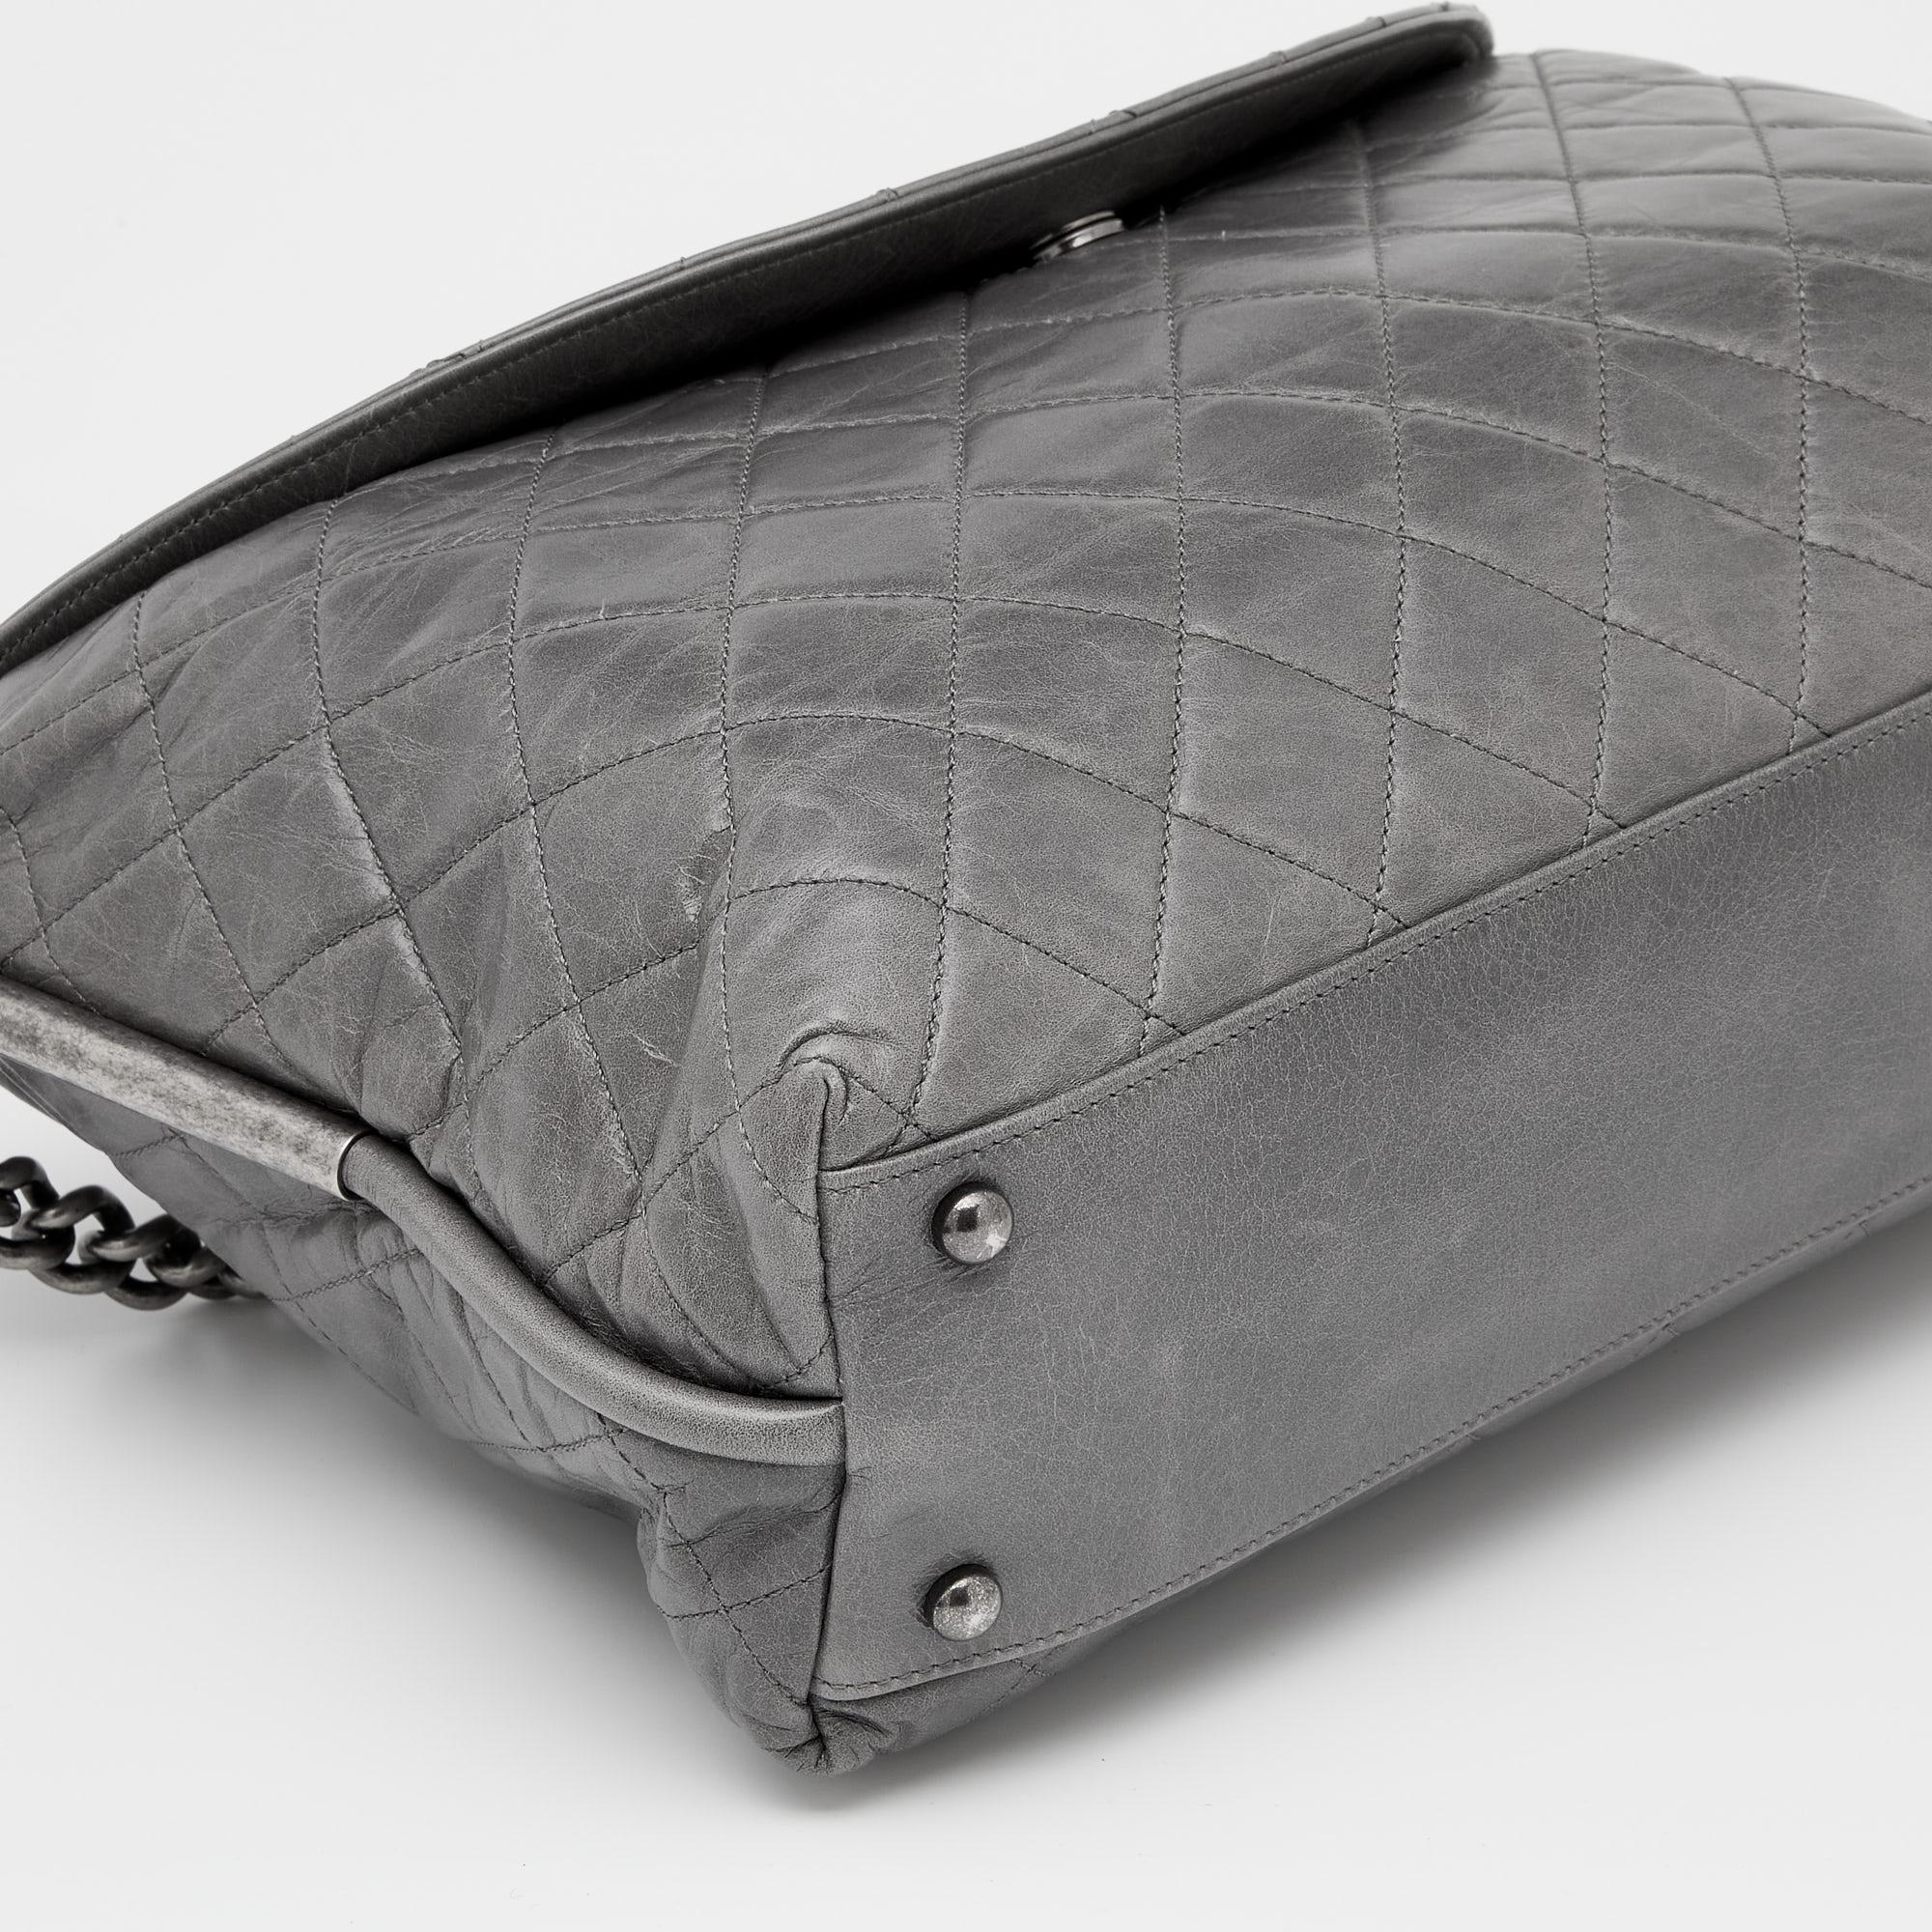 Women's Chanel Grey Quilted Leather Shoulder Bag